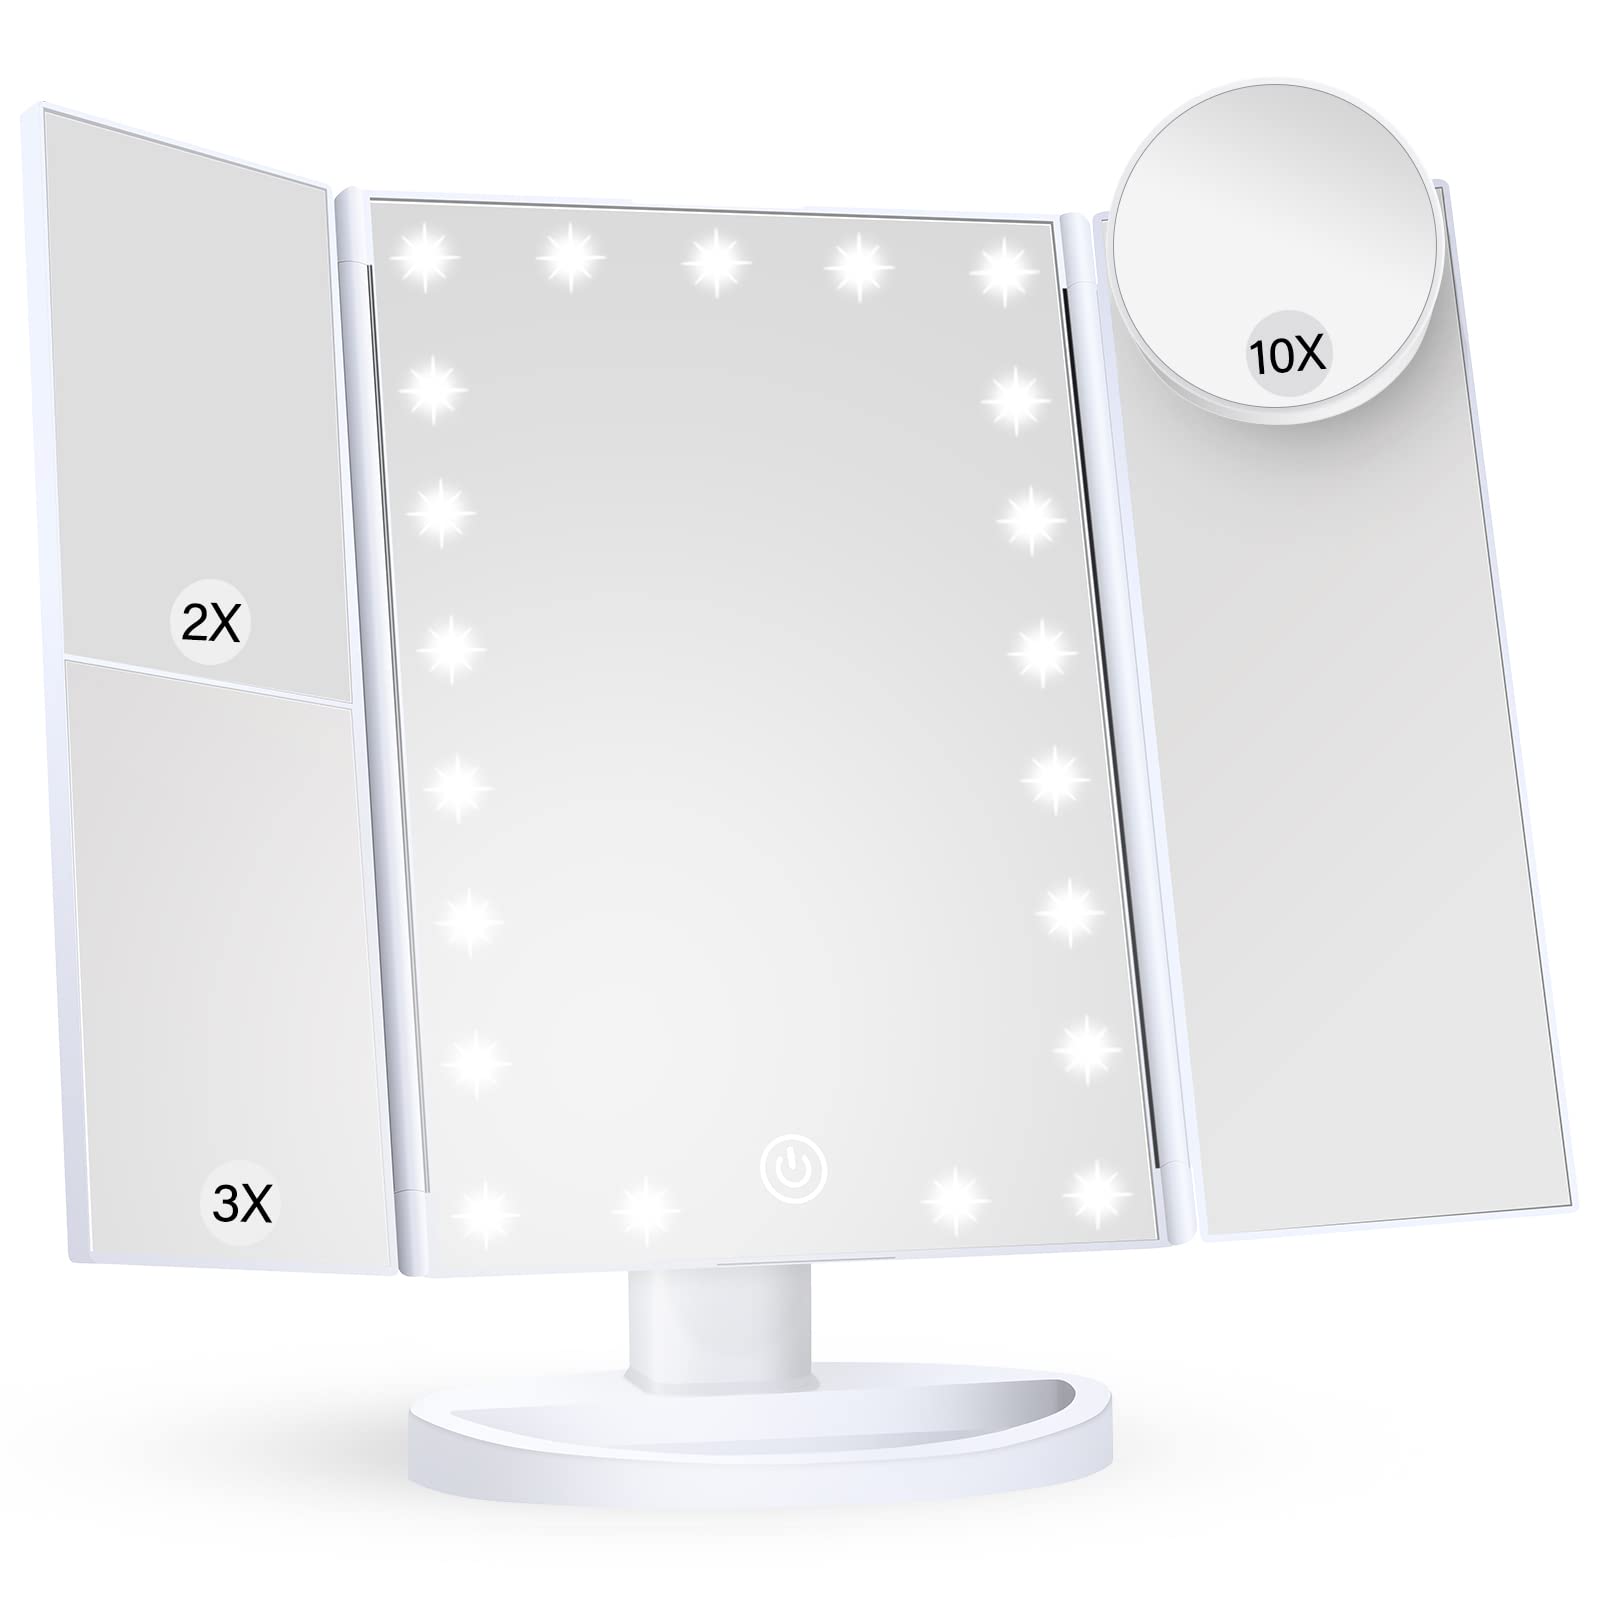 Makeup Mirror with Lights, Vanity Mirror with 1X 2X 3X Magnification, Lighted Makeup Mirror, Trifold Makeup Mirror, Touch Control, Dual Power Supply, Portable LED Makeup Mirror, Women Gift (White)